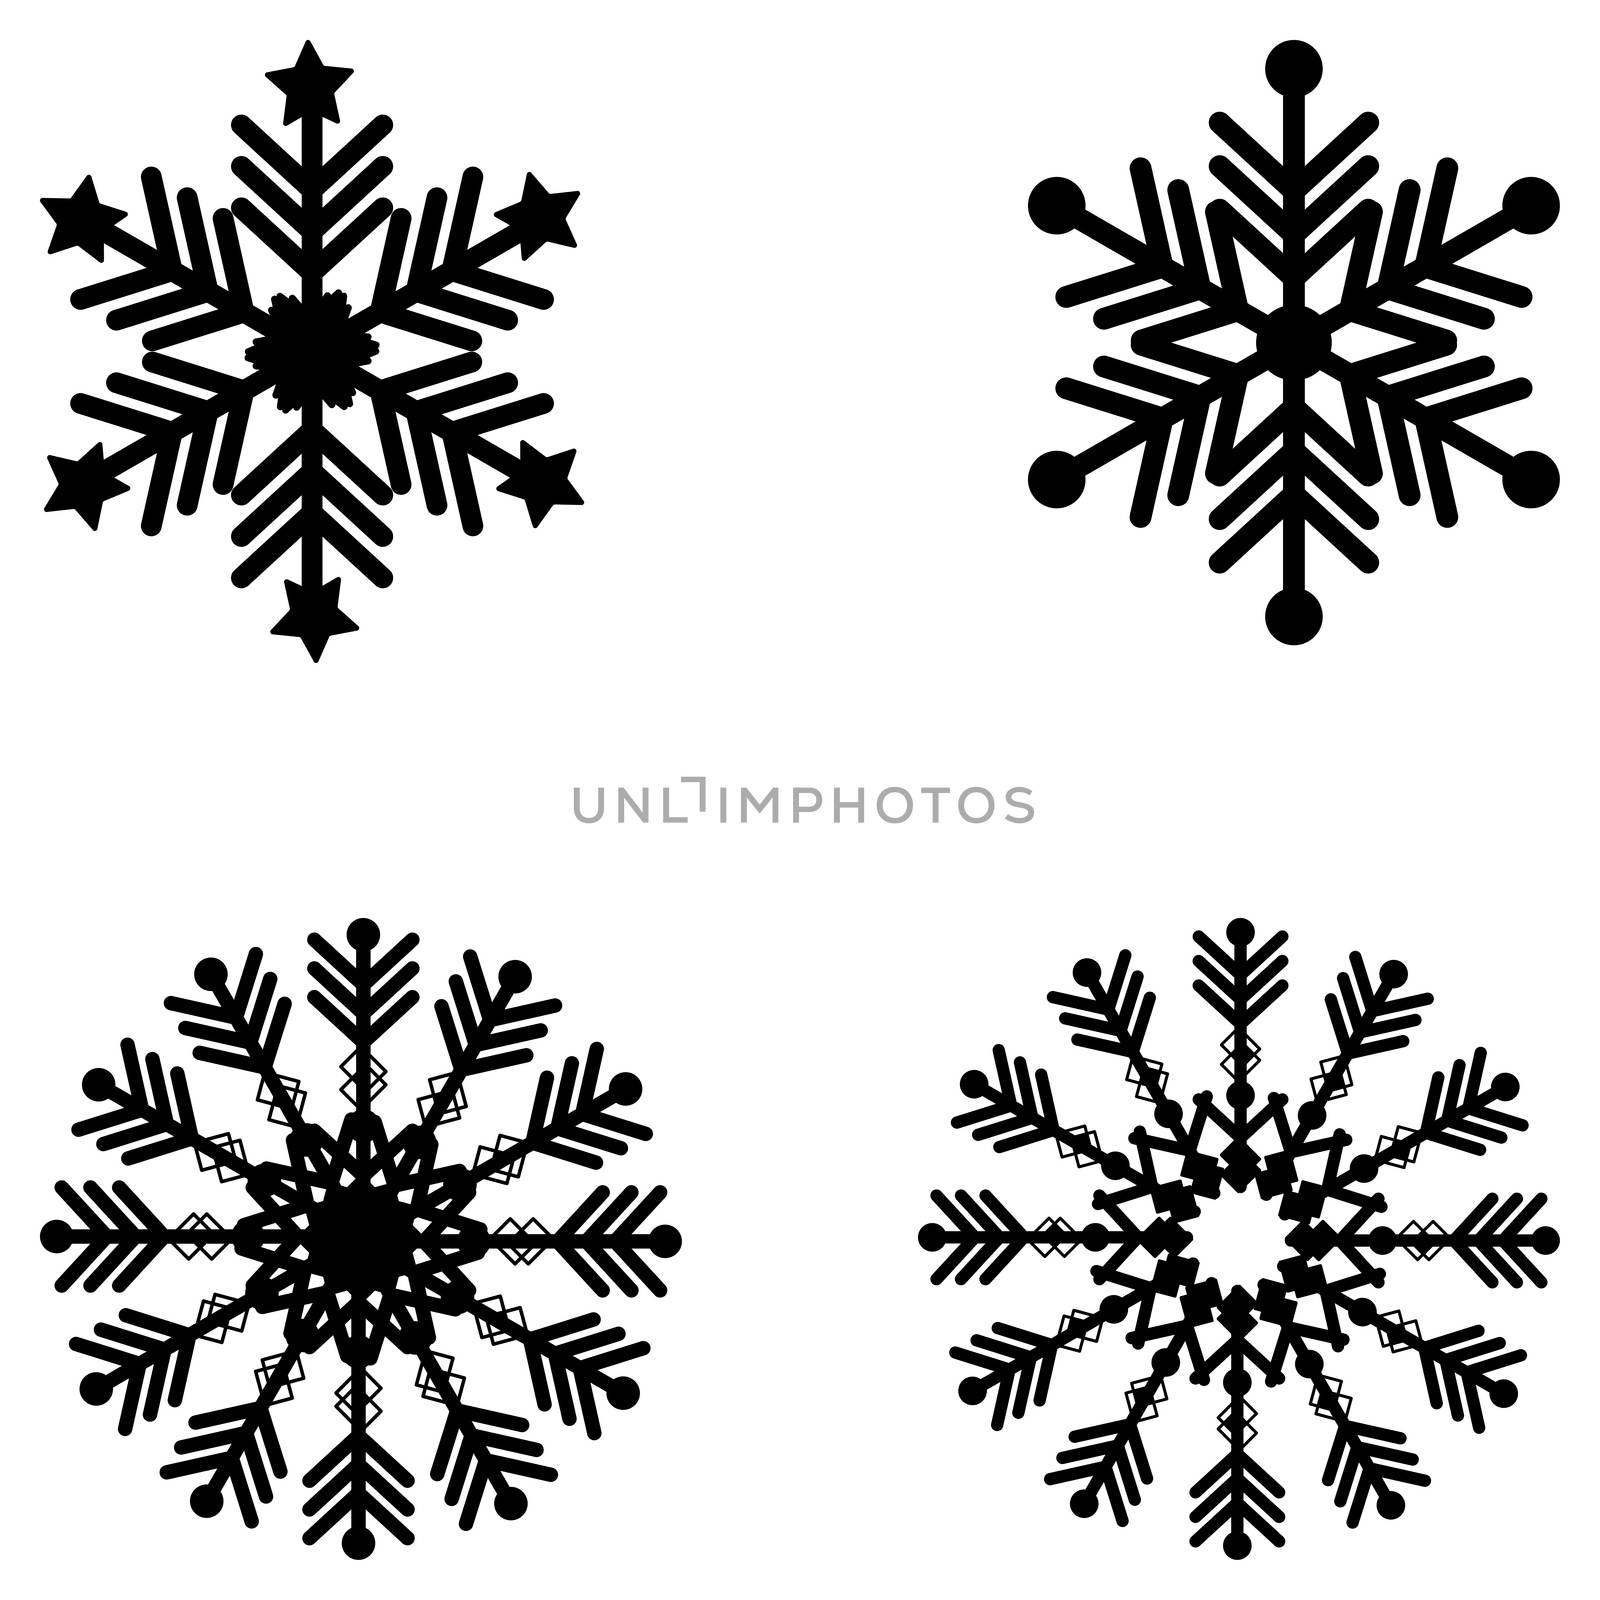 Paper cutout snowflakes isolated on white background. Winter christmas decoration. Black paper decoration template for scrapbooking, laser cutting, cut out printers, wood. by Nata_Prando